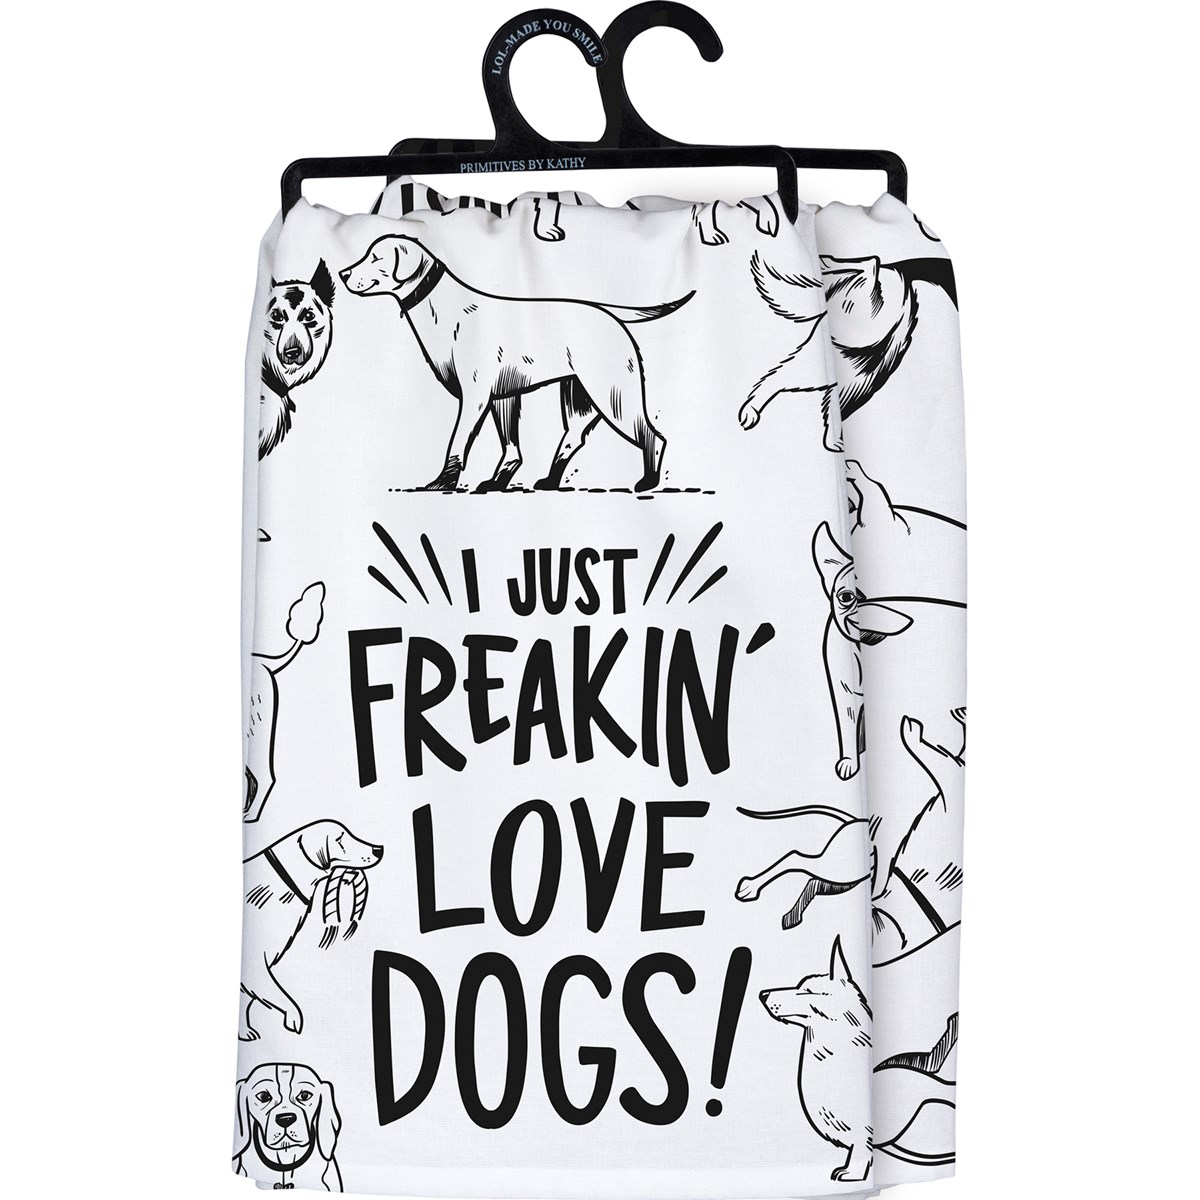 I Just Freakin' Love Dogs Kitchen Towel - Cotton